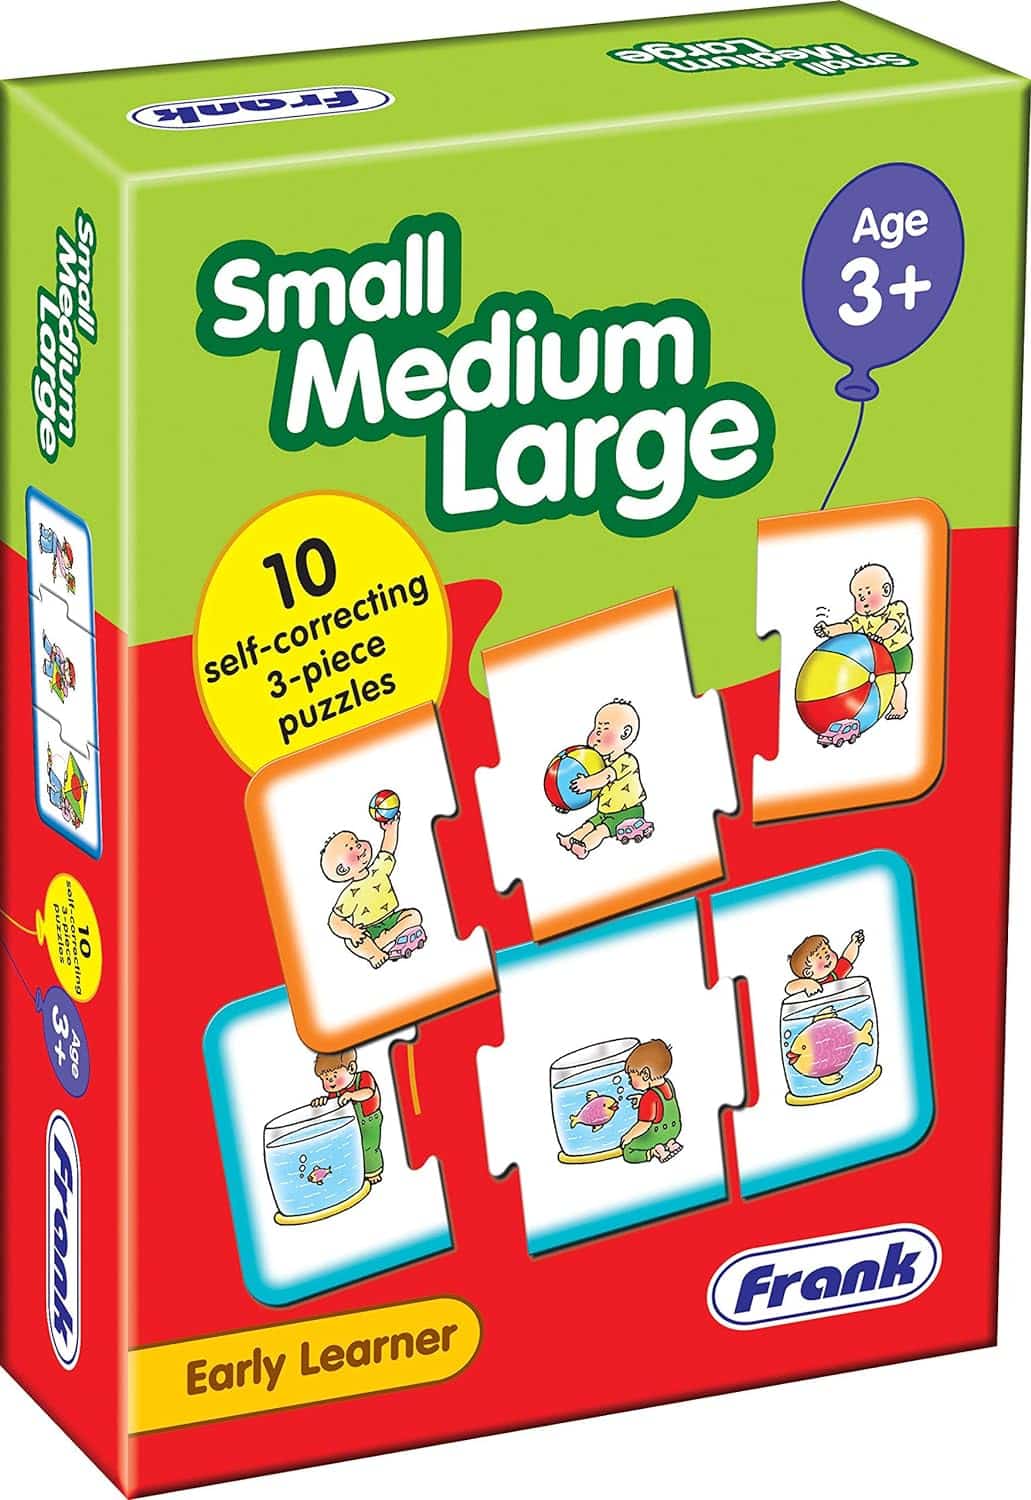 Frank Small Medium Large Puzzle – A Fun and Educational Jigsaw Puzzle Set